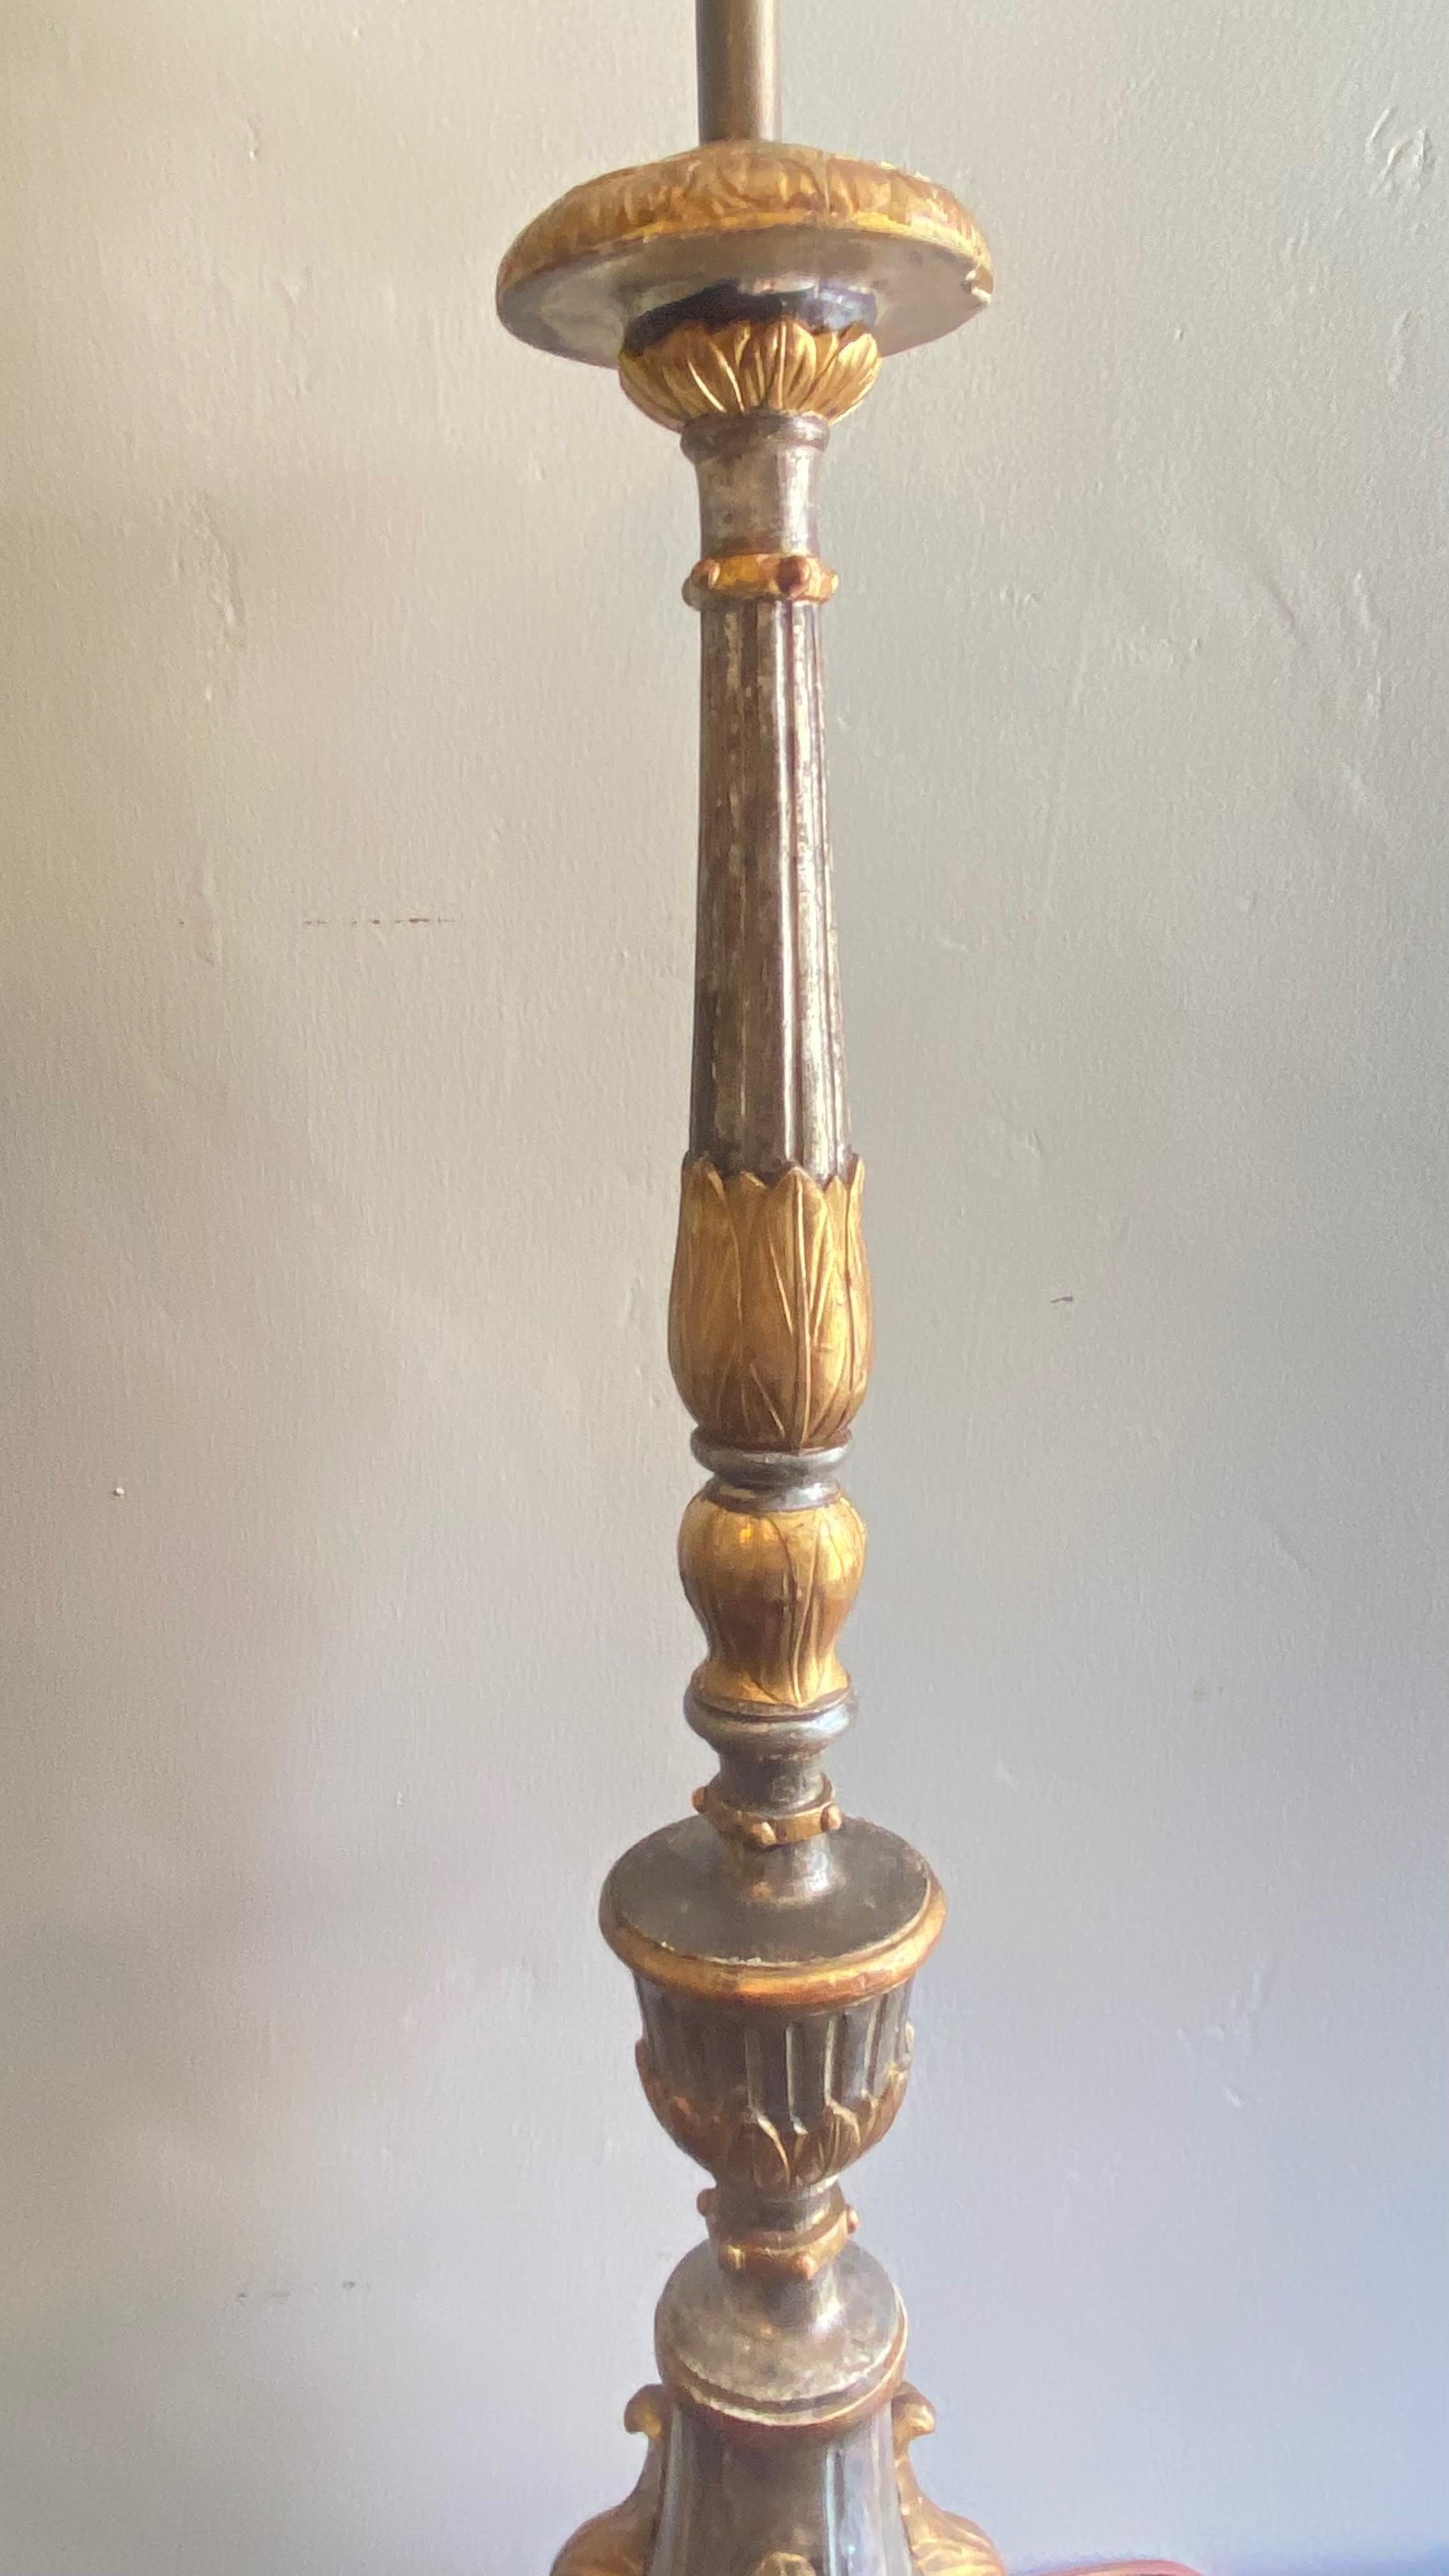 Tall 18th Century Continental Silvered and Gilt Candle Stand Lamps 1